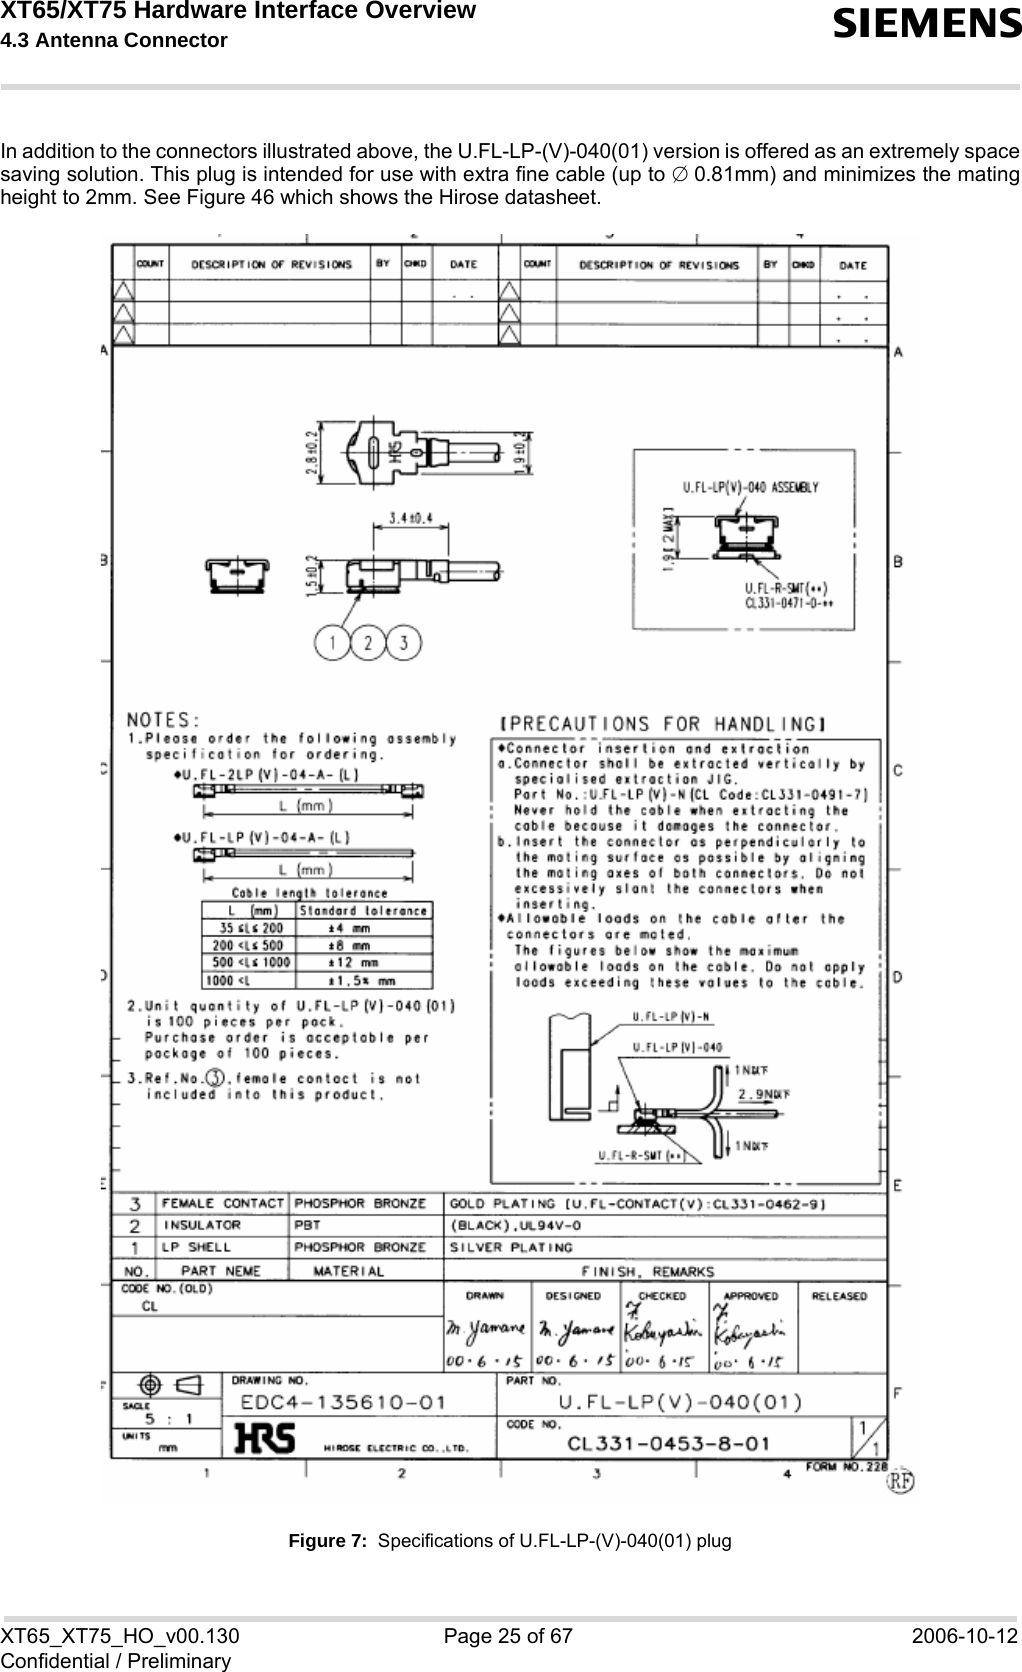 XT65/XT75 Hardware Interface Overview 4.3 Antenna Connector sXT65_XT75_HO_v00.130 Page 25 of 67 2006-10-12Confidential / PreliminaryIn addition to the connectors illustrated above, the U.FL-LP-(V)-040(01) version is offered as an extremely spacesaving solution. This plug is intended for use with extra fine cable (up to ;0.81mm) and minimizes the matingheight to 2mm. See Figure 46 which shows the Hirose datasheet.Figure 7:  Specifications of U.FL-LP-(V)-040(01) plug